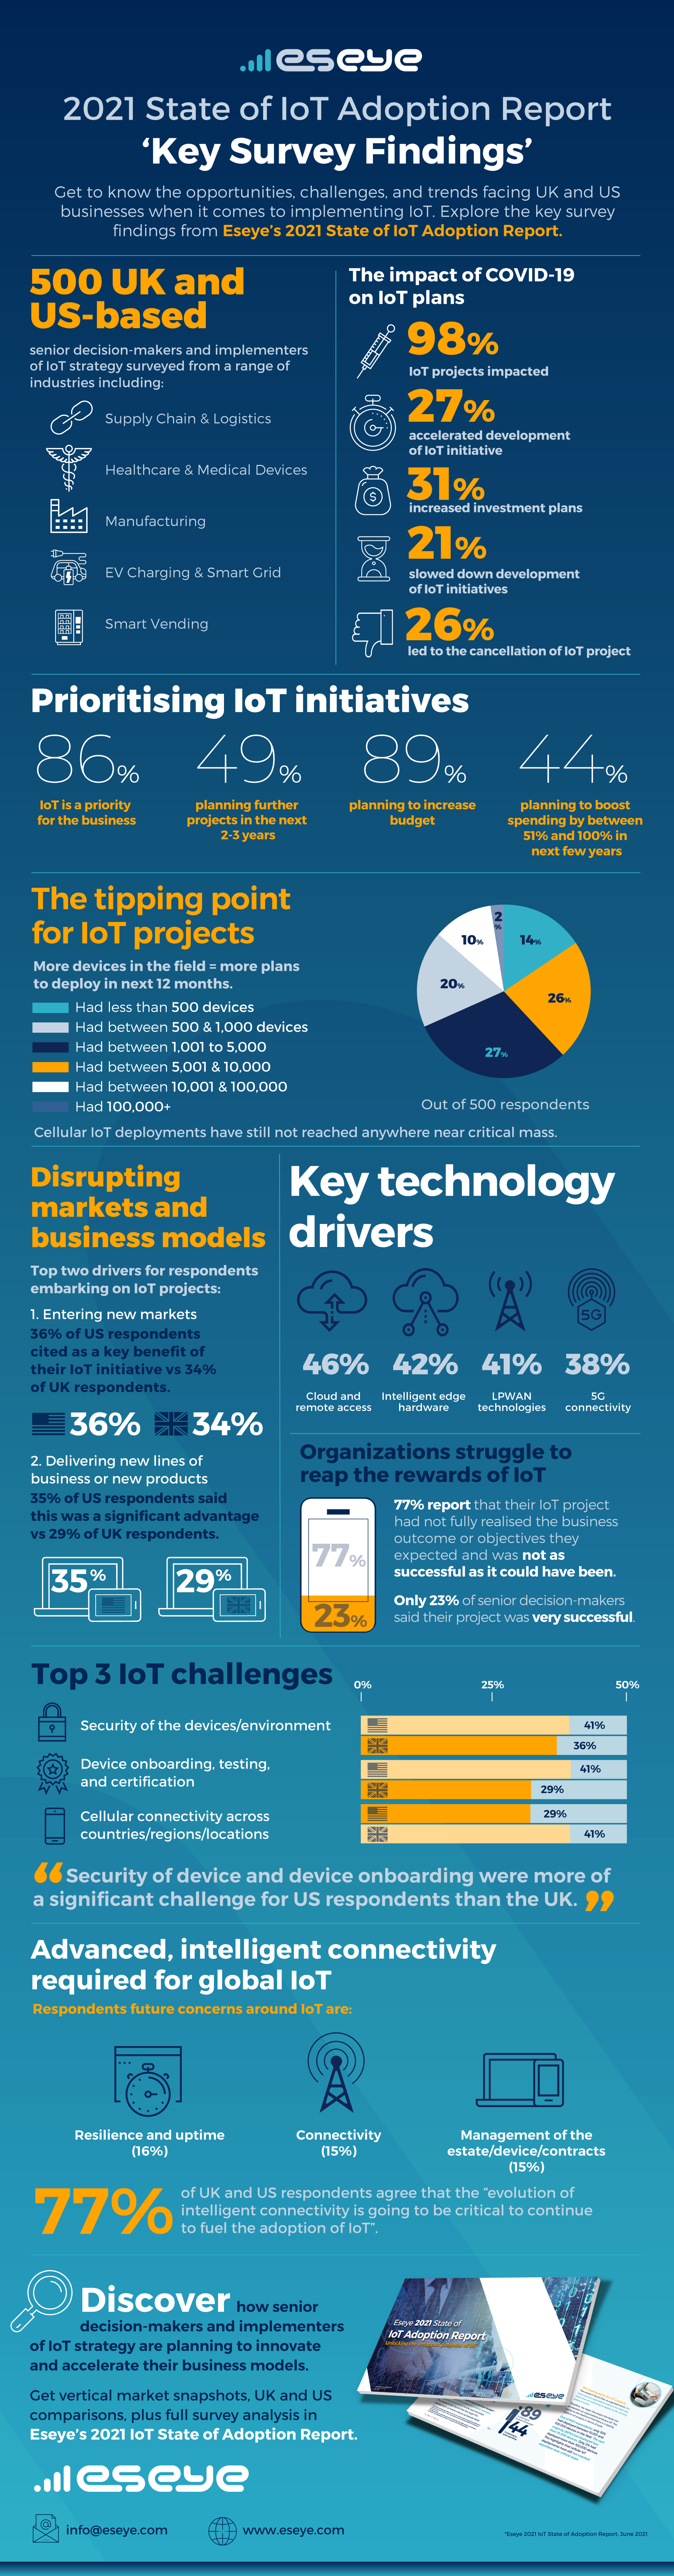 Eseye State of IoT Adoption Key Findings Infographic